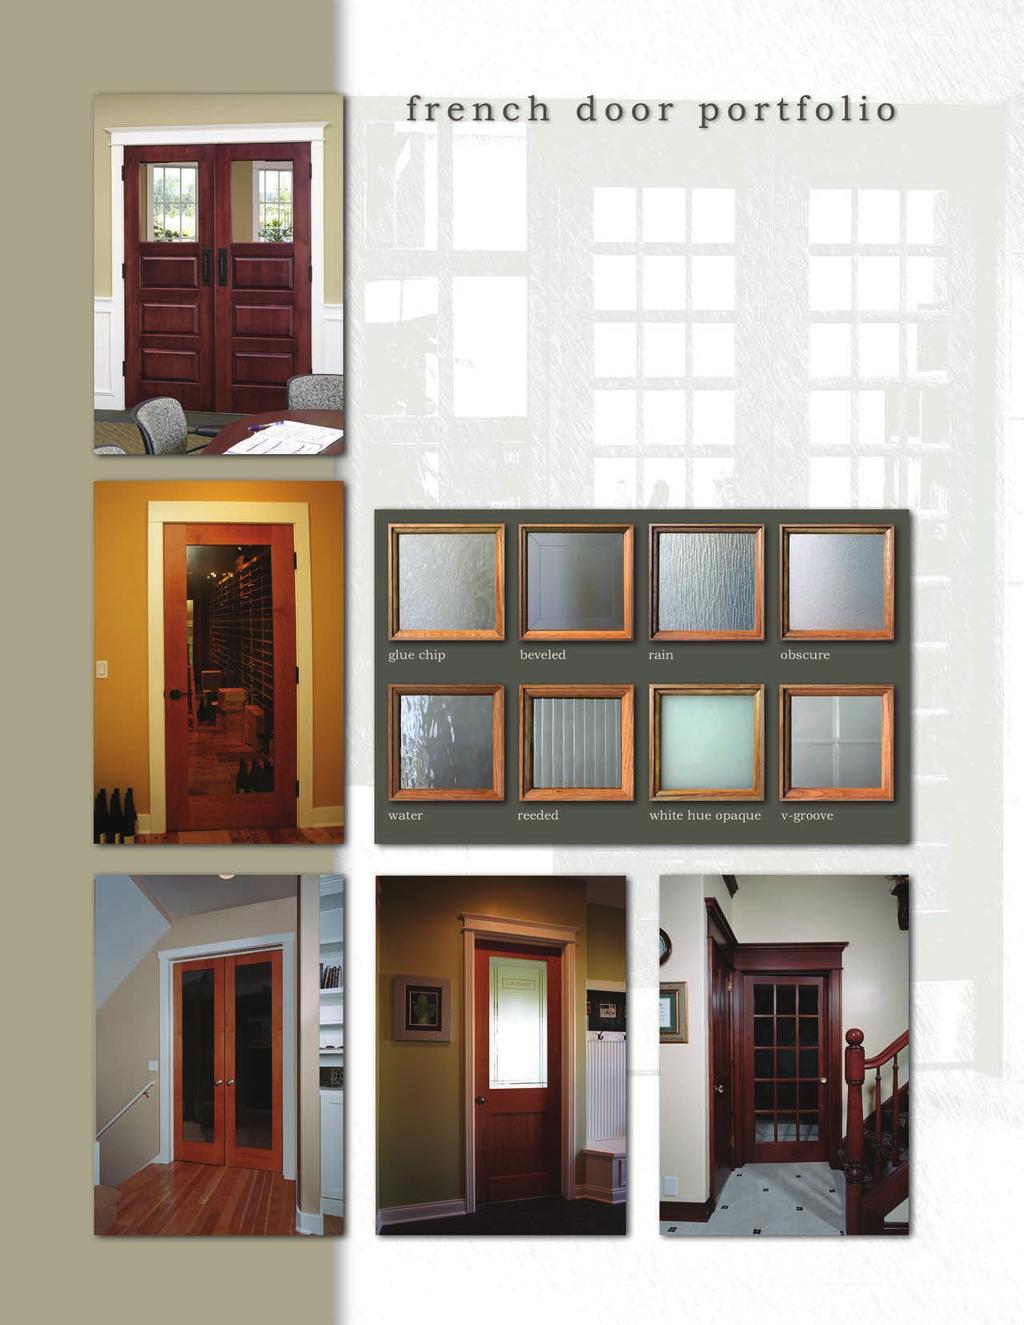 See The Light Karona offers a wide variety of French doors crafted to the highest standards. Our doors allow you to open up a room without moving a wall.